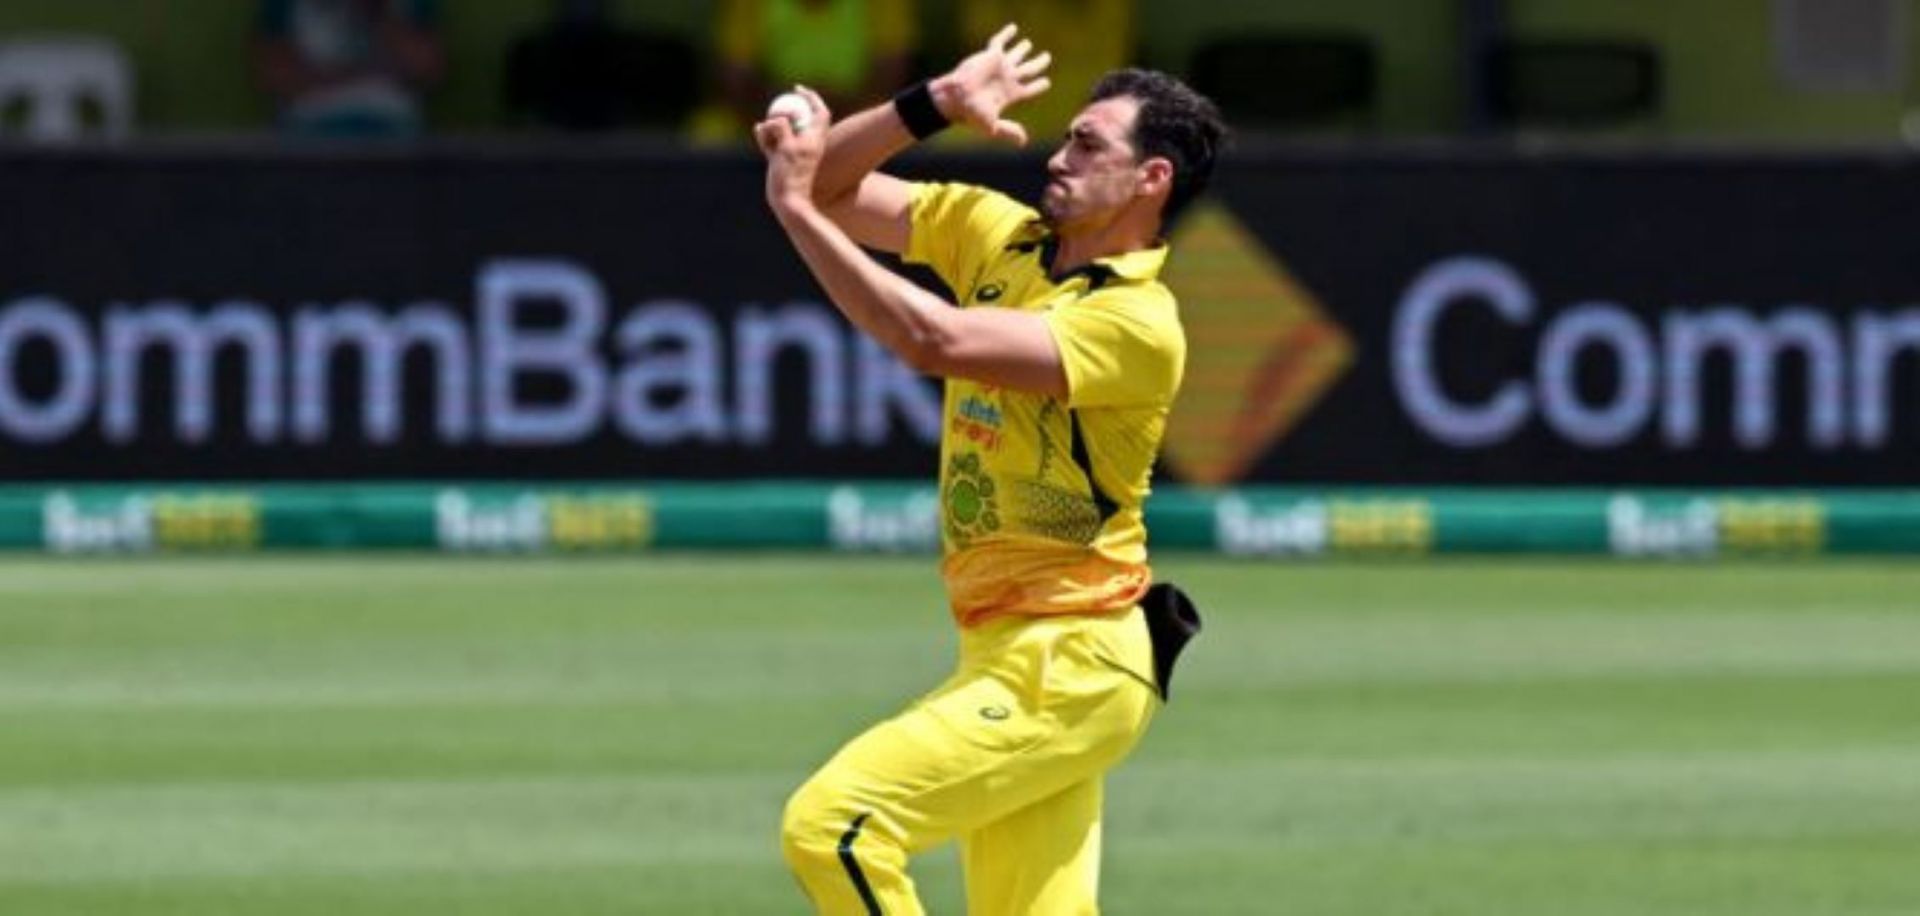 Mitchell Starc has been arguably the best bowler in the last two World Cups.